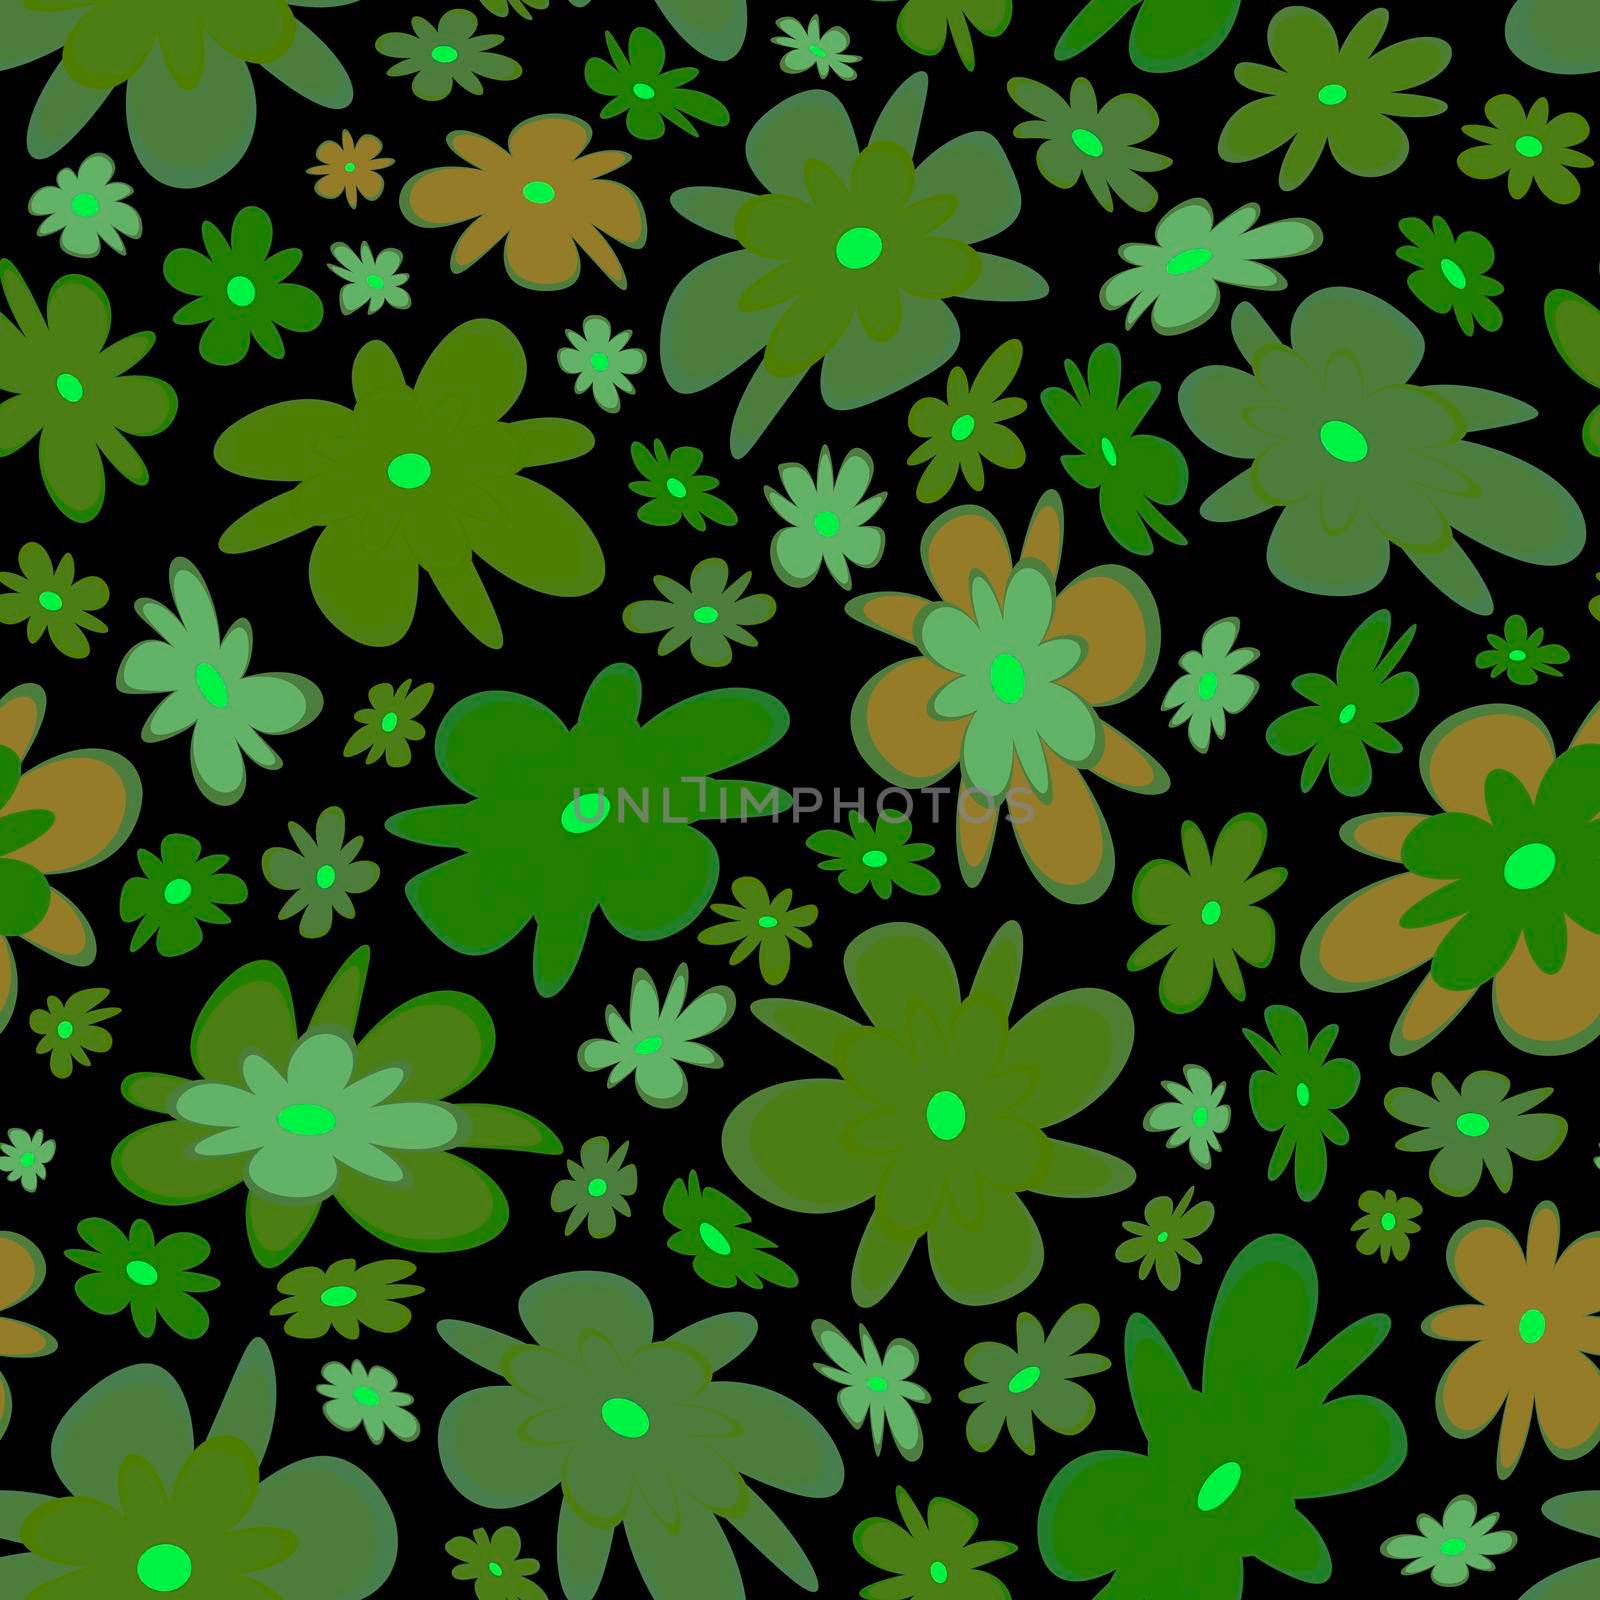 Trendy fabric pattern with miniature flowers.Summer print.Fashion design.Motifs scattered random.Elegant template for fashion prints.Good for fashion,textile,fabric,gift wrapping paper.Green on black.